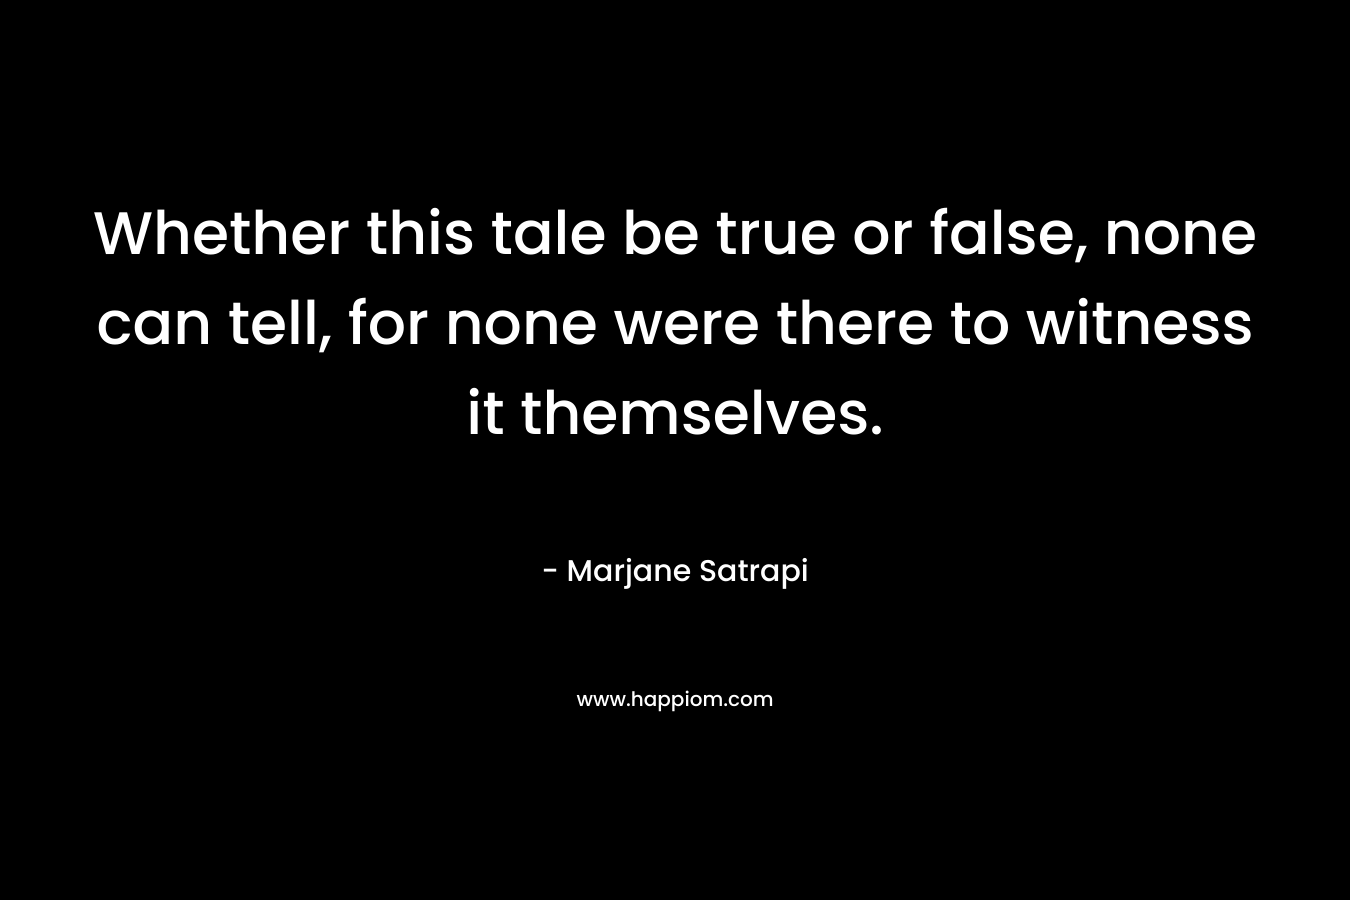 Whether this tale be true or false, none can tell, for none were there to witness it themselves. – Marjane Satrapi